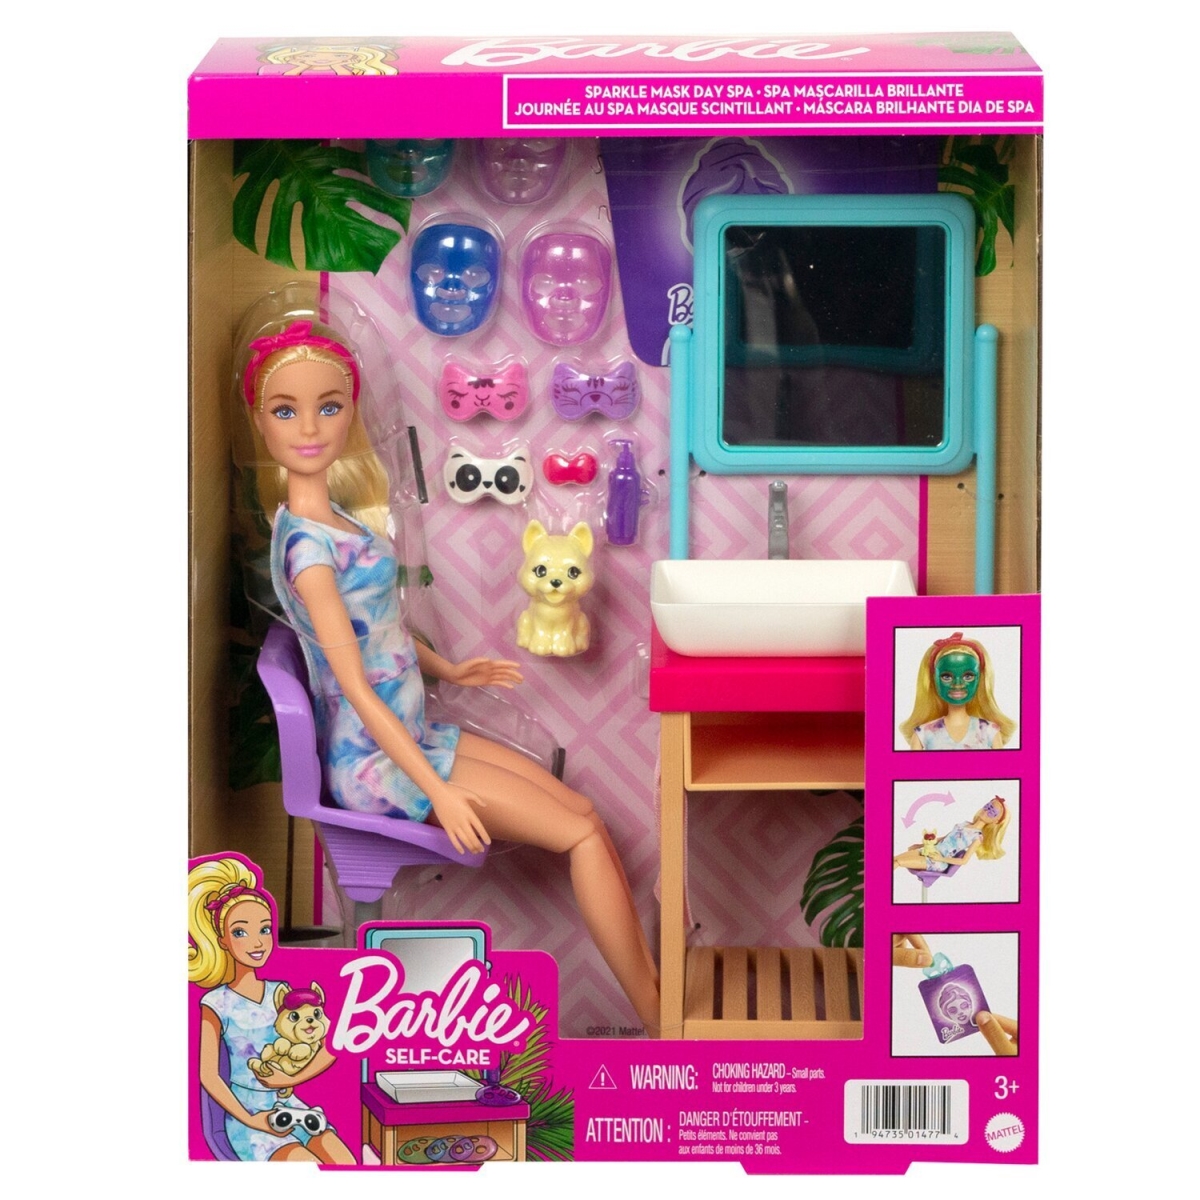 Picture of Barbie 304472 25 x 8 x 32 cm Sparkle Mask Day Spa Play Set